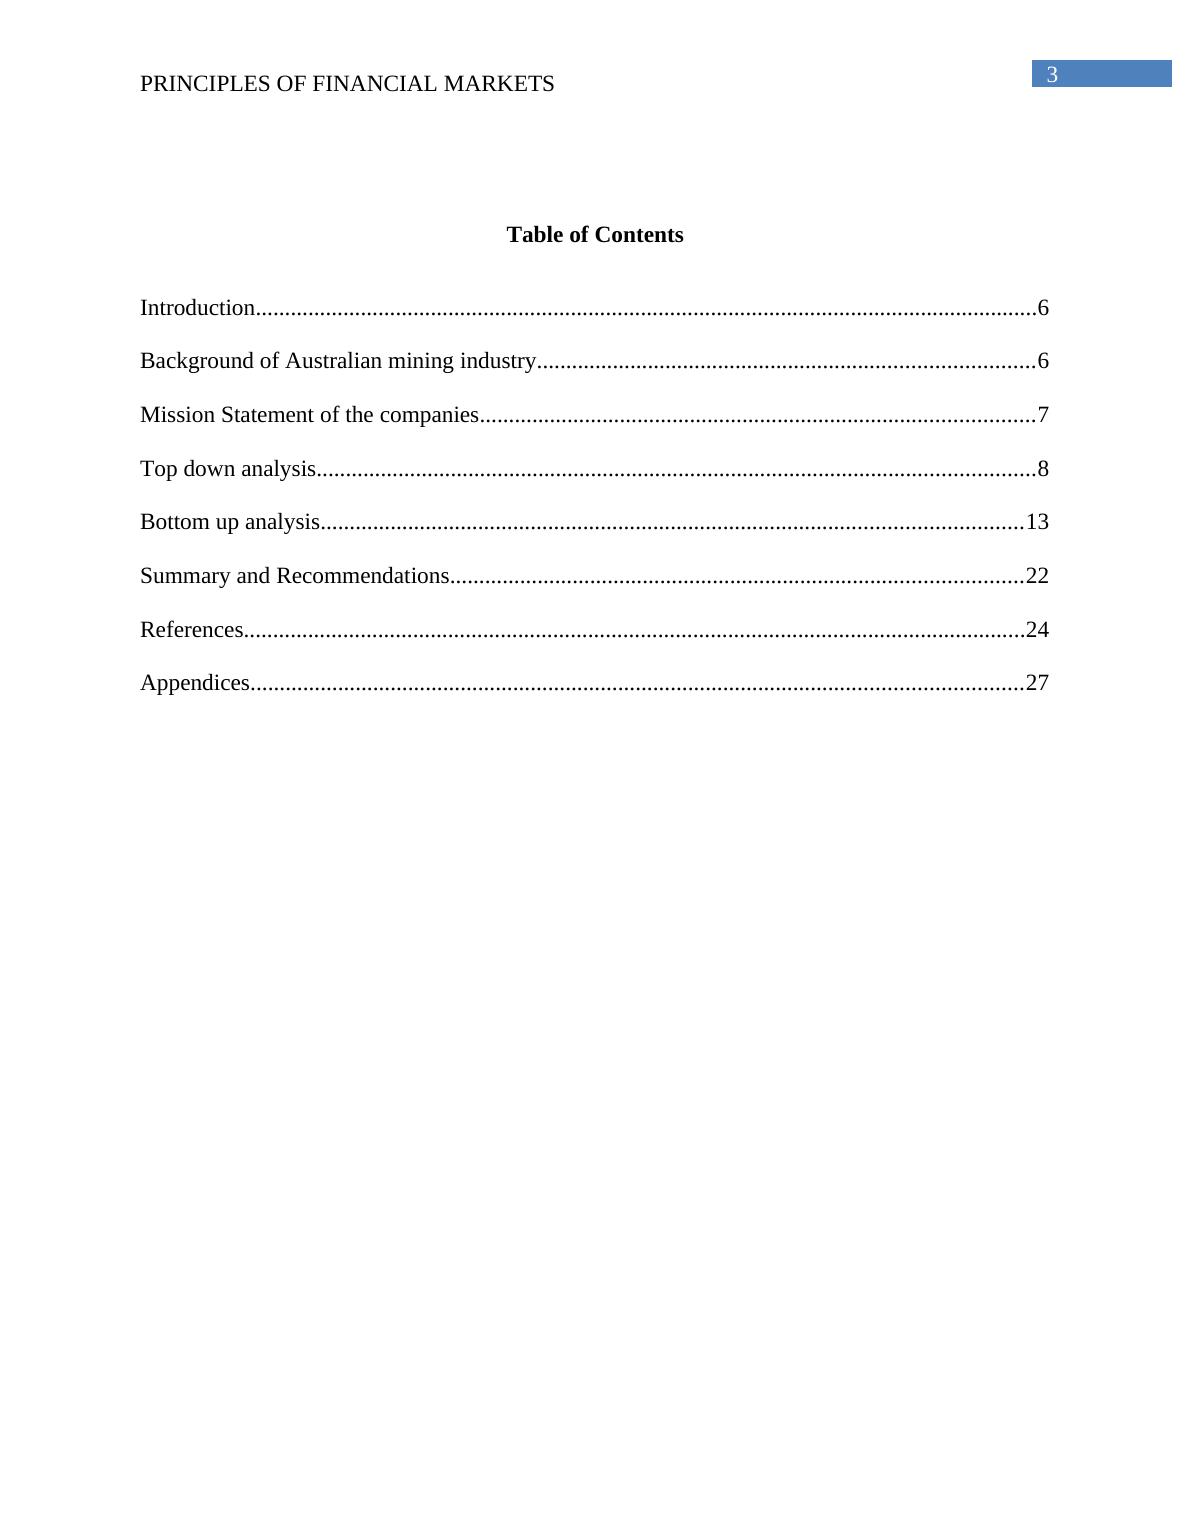 HA1022 Principals of Financial Markets |  analysis of mineral industry_3